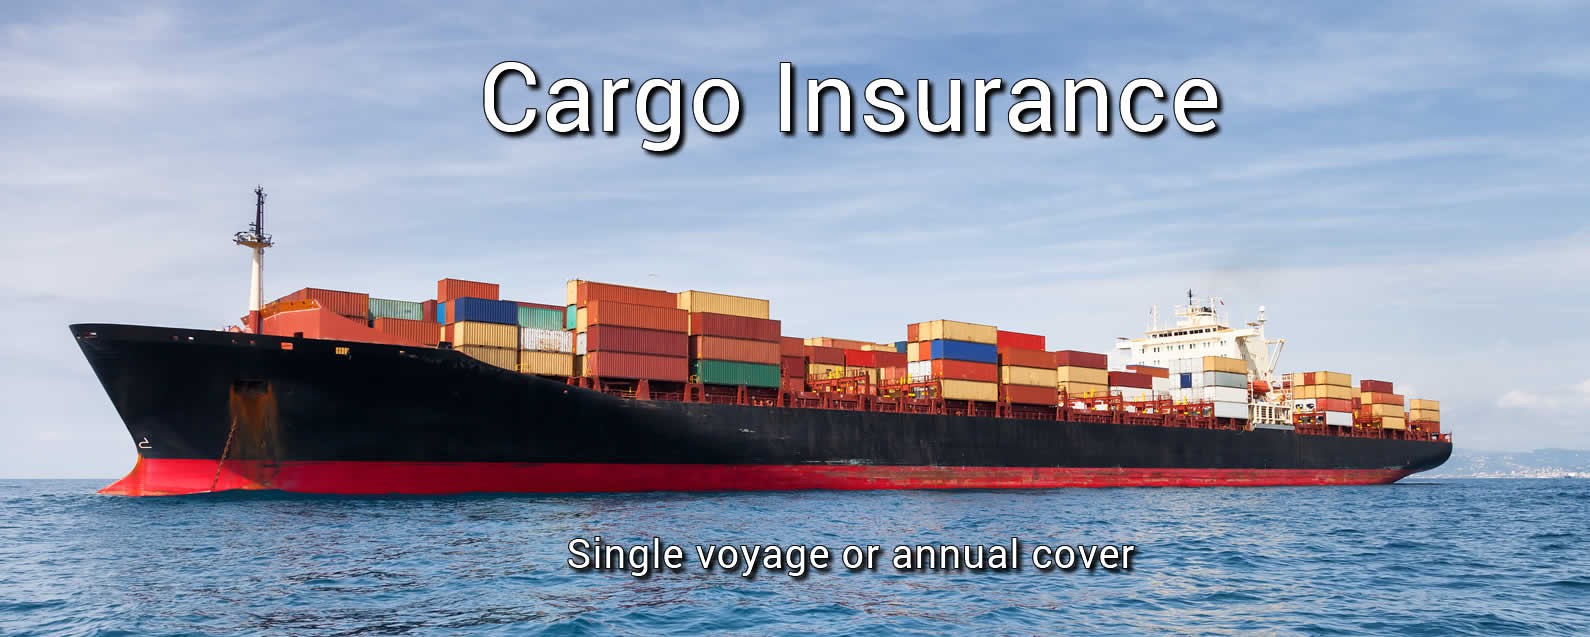 insured container ship with 'single voyage or annual cover' label